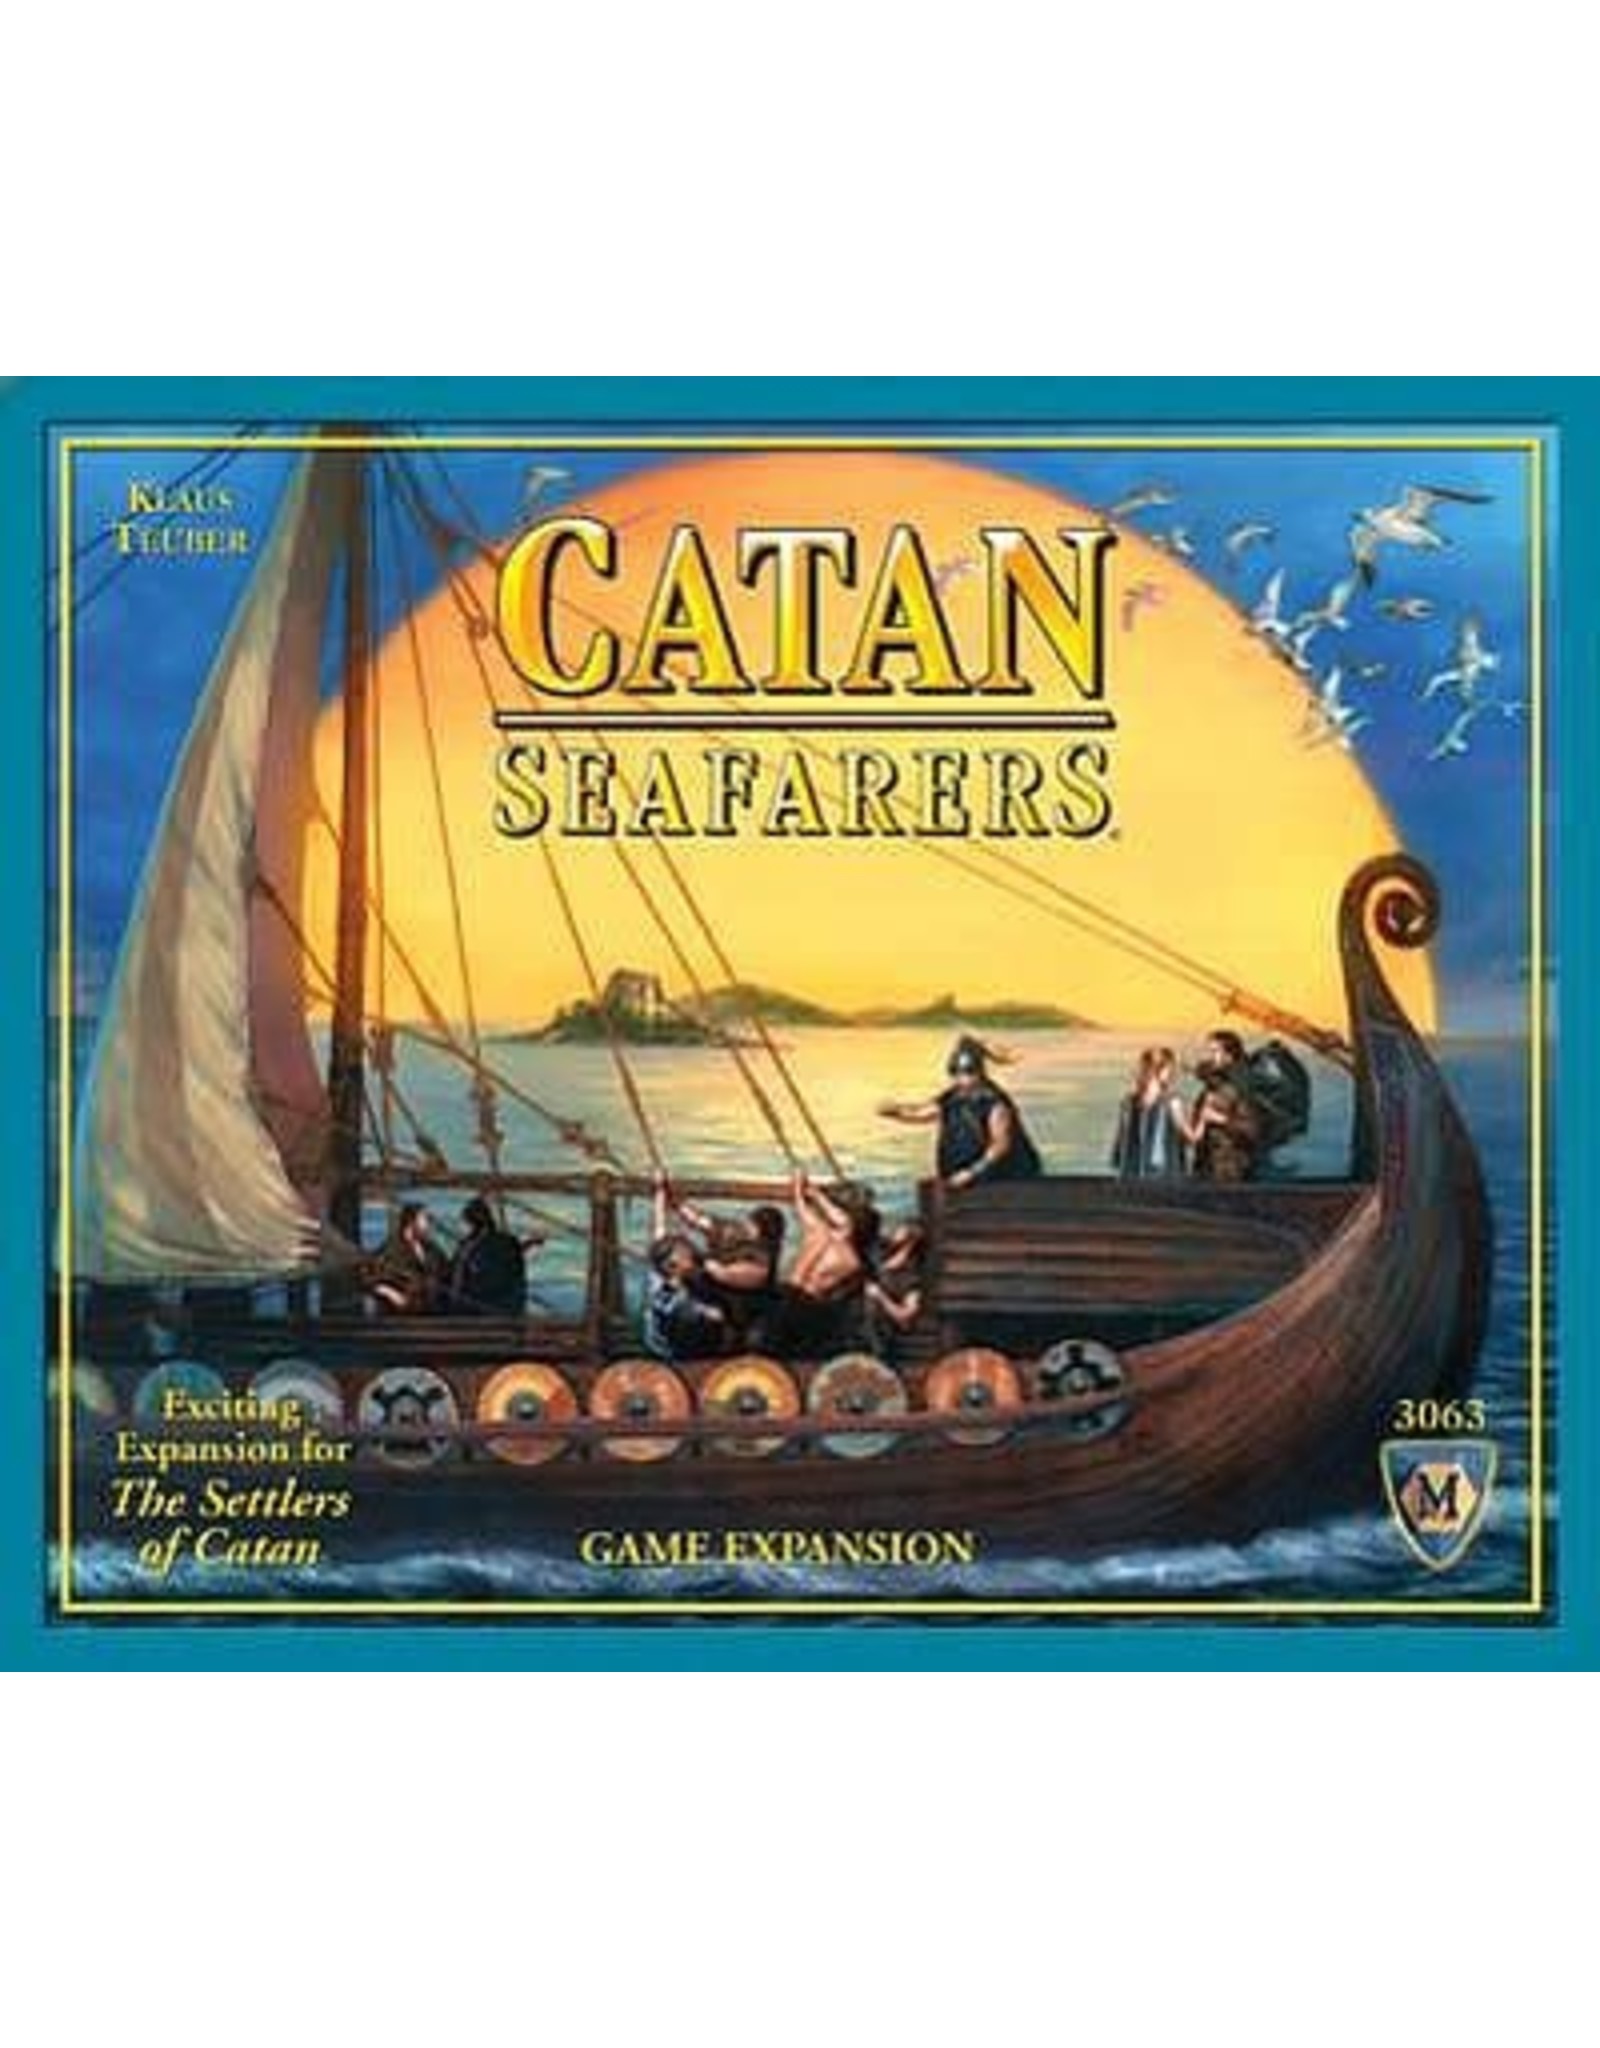 Mayfair Settlers Of Catan: Seafarers Expansion Re-Launch Edition (2007) ( Hidden, missing)